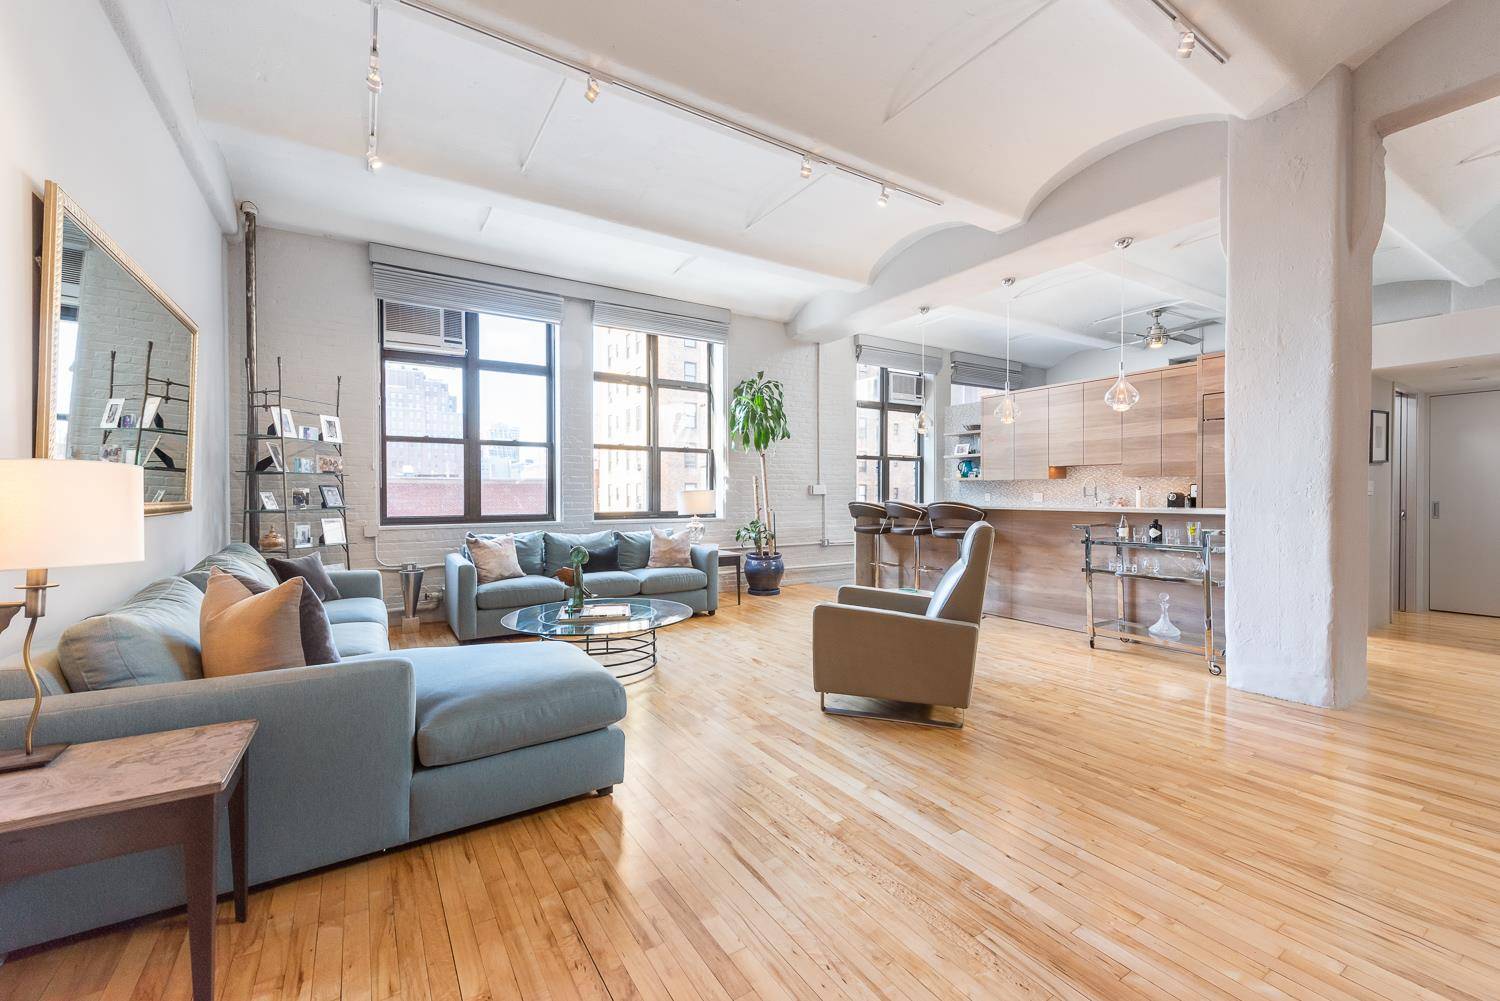 Upon entering this grand and gracious, recently renovated prewar loft beauty with 12 ft vaulted ceilings, huge Thermopane windows, and hand restored original pine floors, you'll instantly be impressed by ...